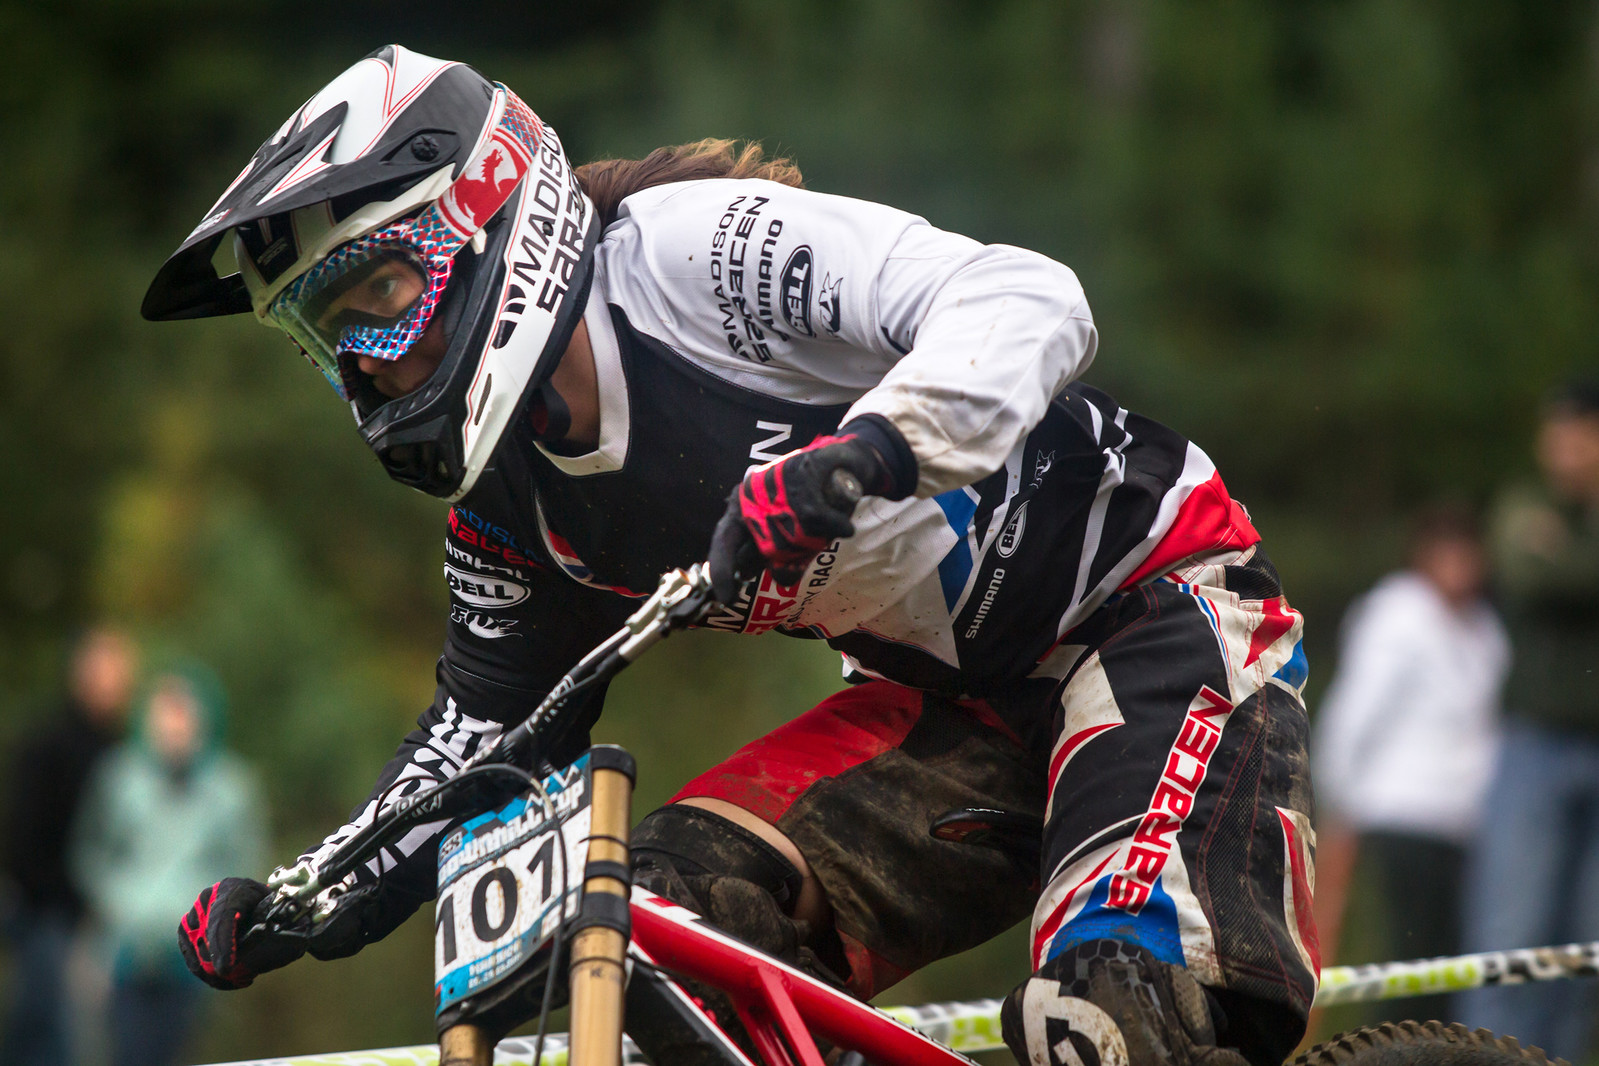 Downhill Cup. IXS Shawn. Ride players